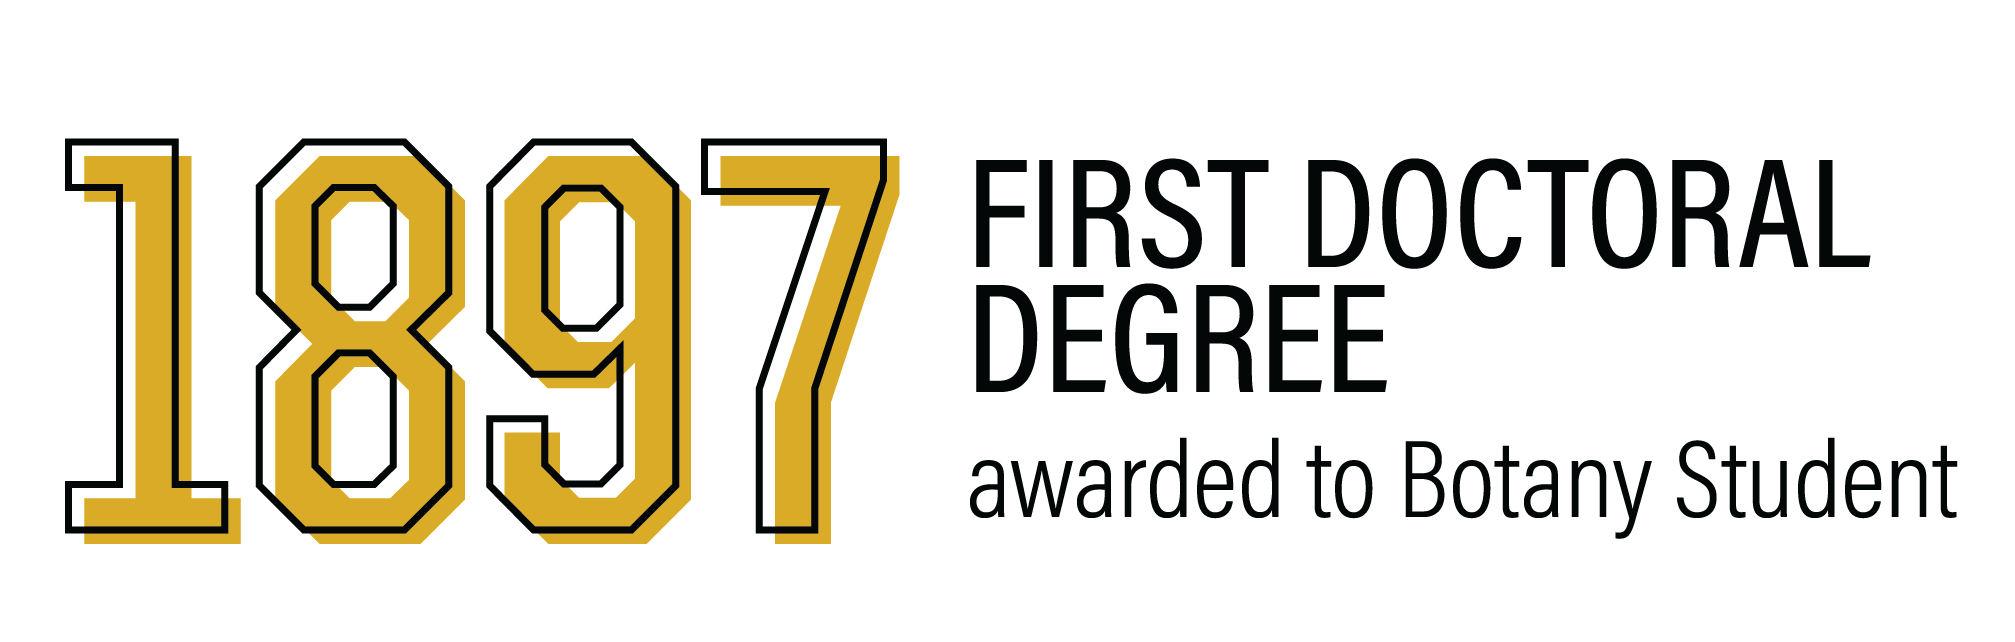 Infographic: 1897 first doctoral degree awarded to Botany student